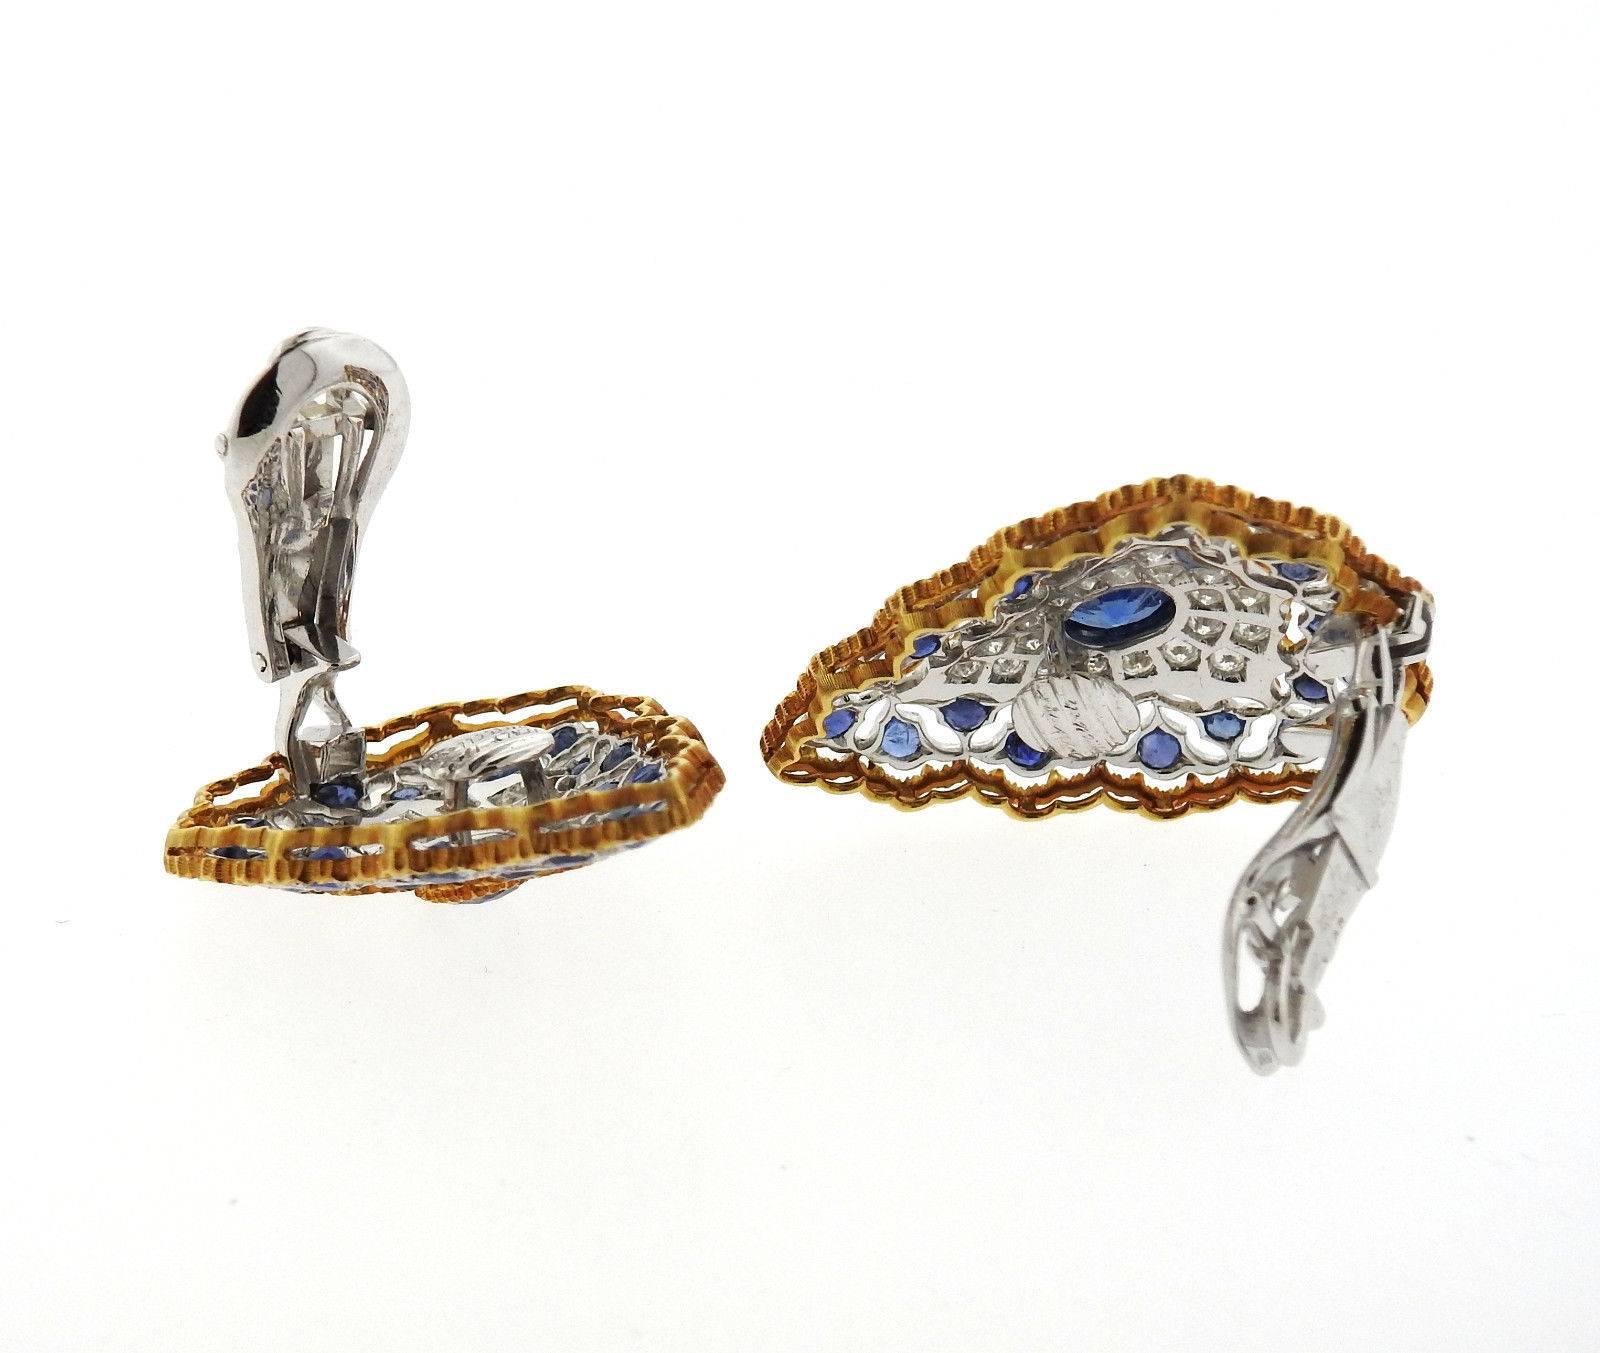 A pair of 18k yellow and white gold earrings set with sapphires and approximately 1 carat of GH/VS diamonds.  The earrings measure 35mm x 25mm and weigh 17.2 grams.  Marked: Buccellati, Italy, 18k.
